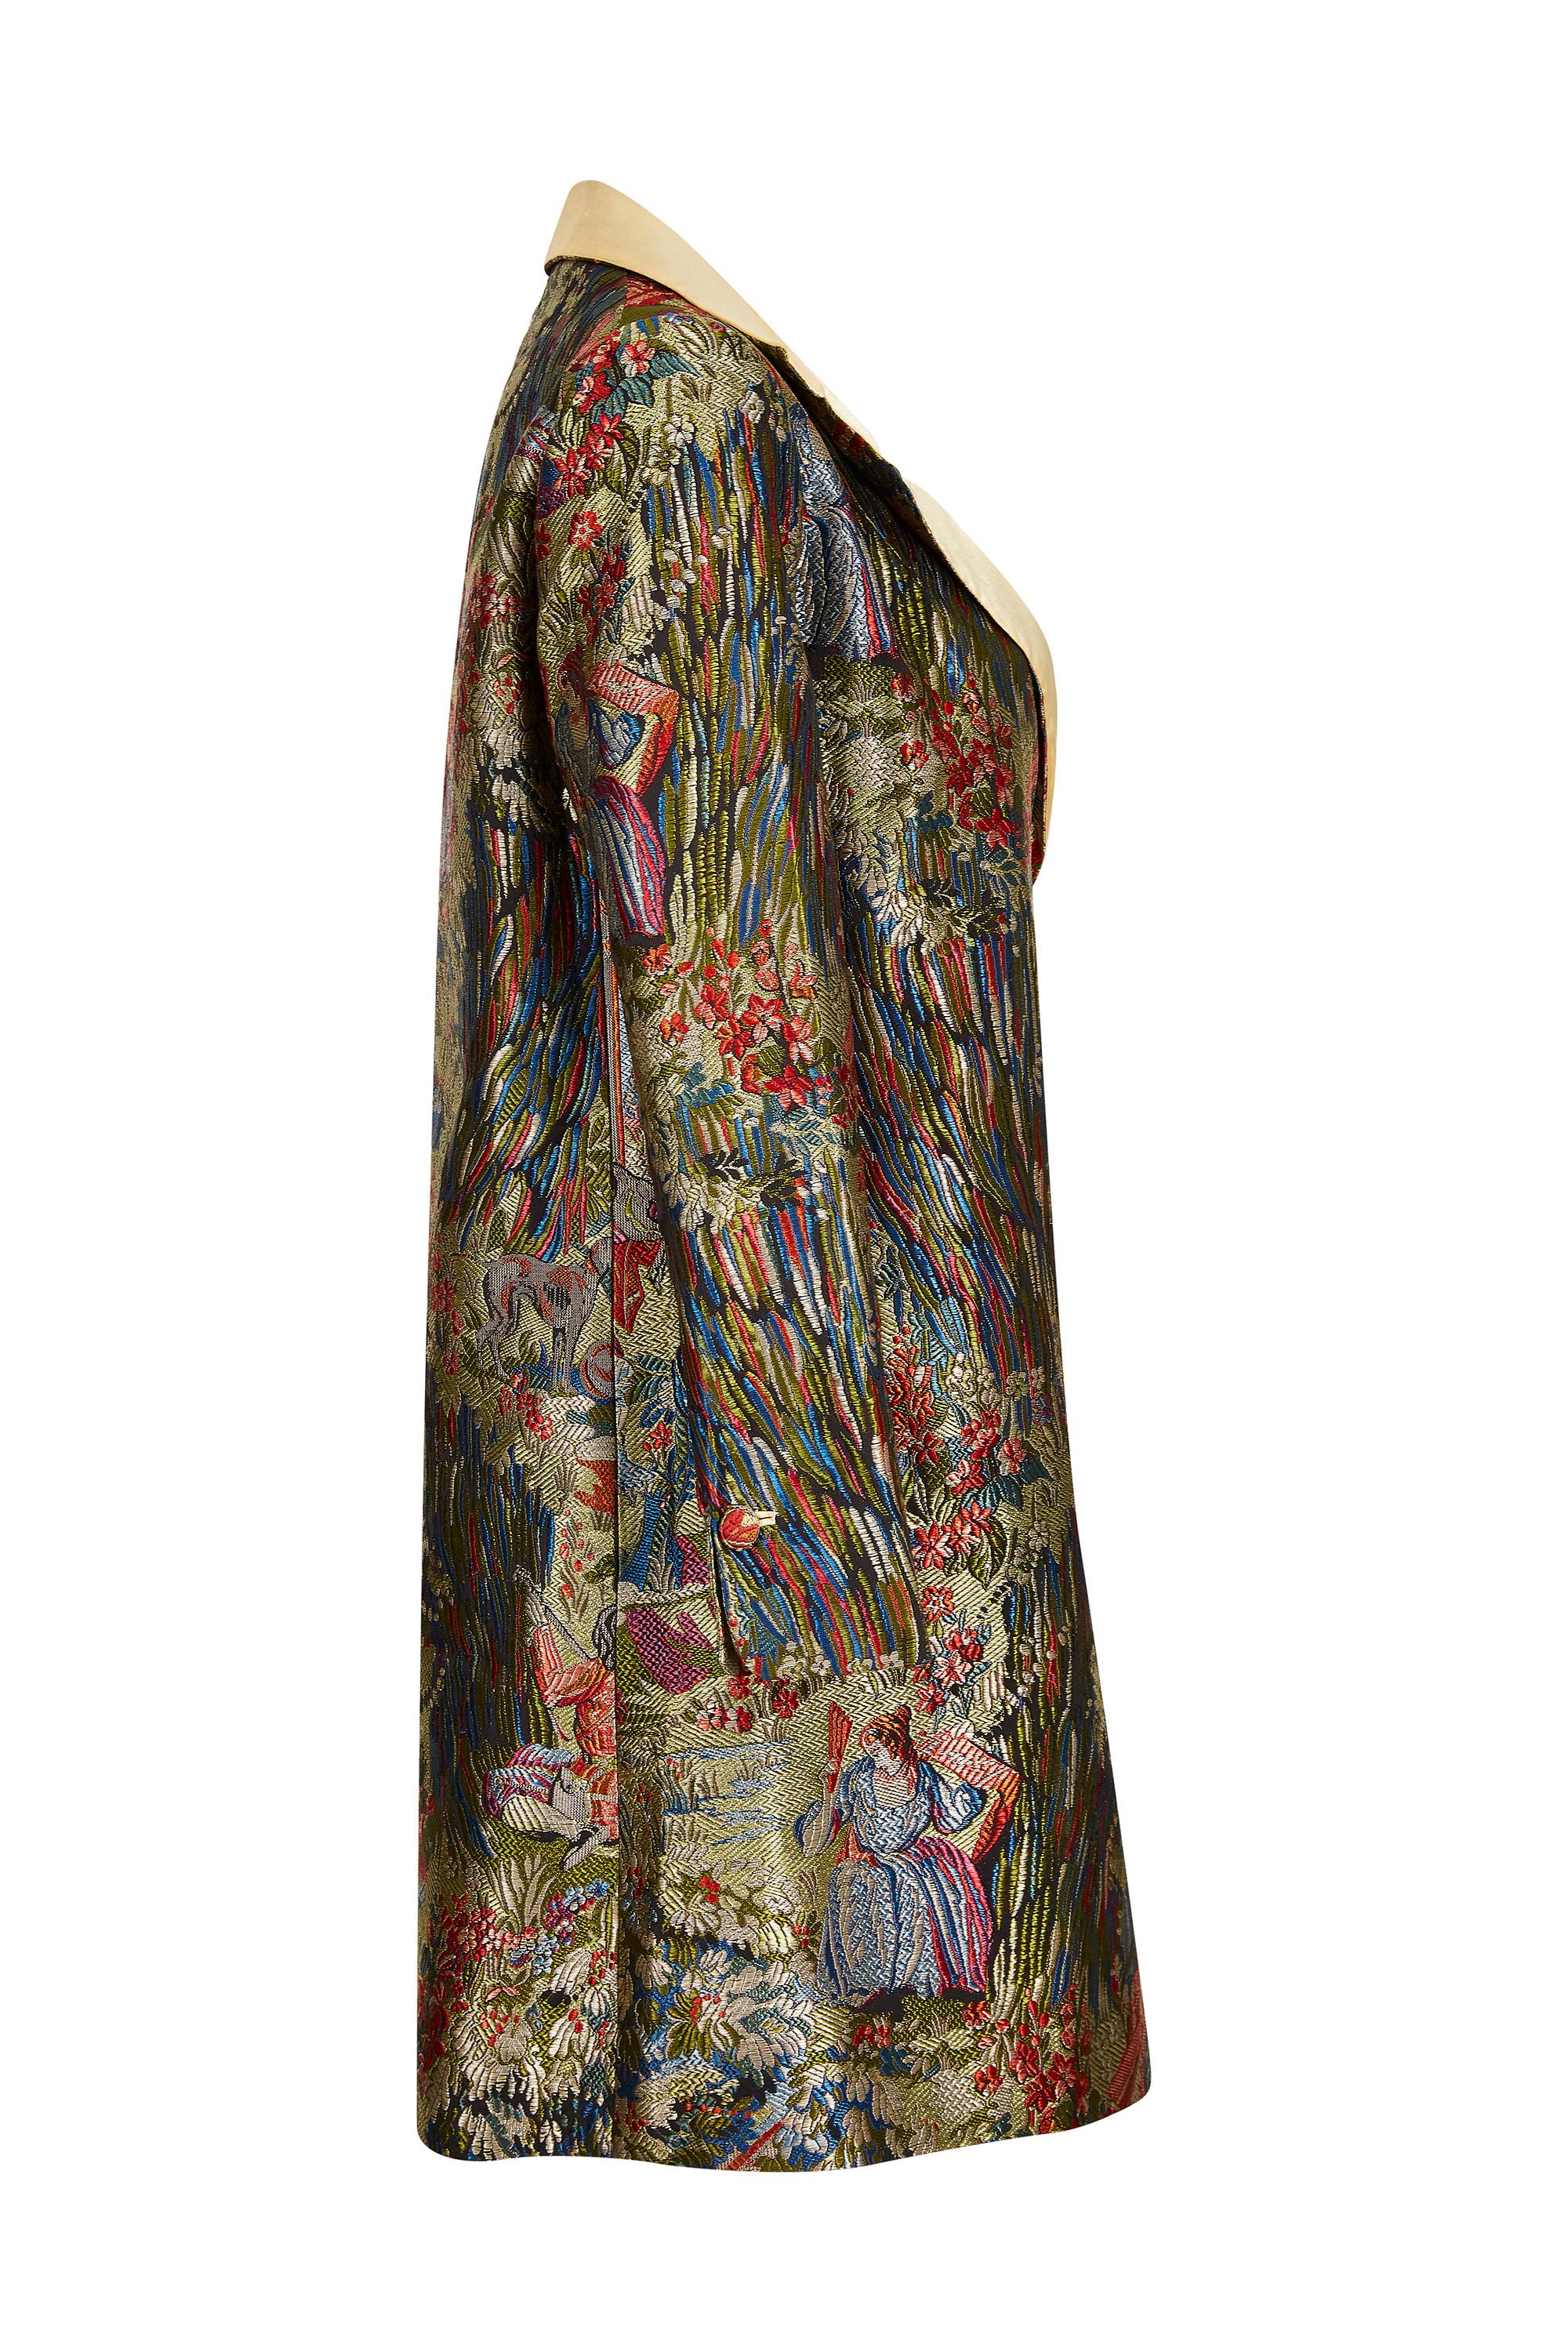 This stylish early 1960s silk brocade jacket with silk lining and collar detail is unlabelled, however, is of exceptional quality and in immaculate vintage condition. The jacket is designed to be worn open and is a clean, elegant cut. It features a